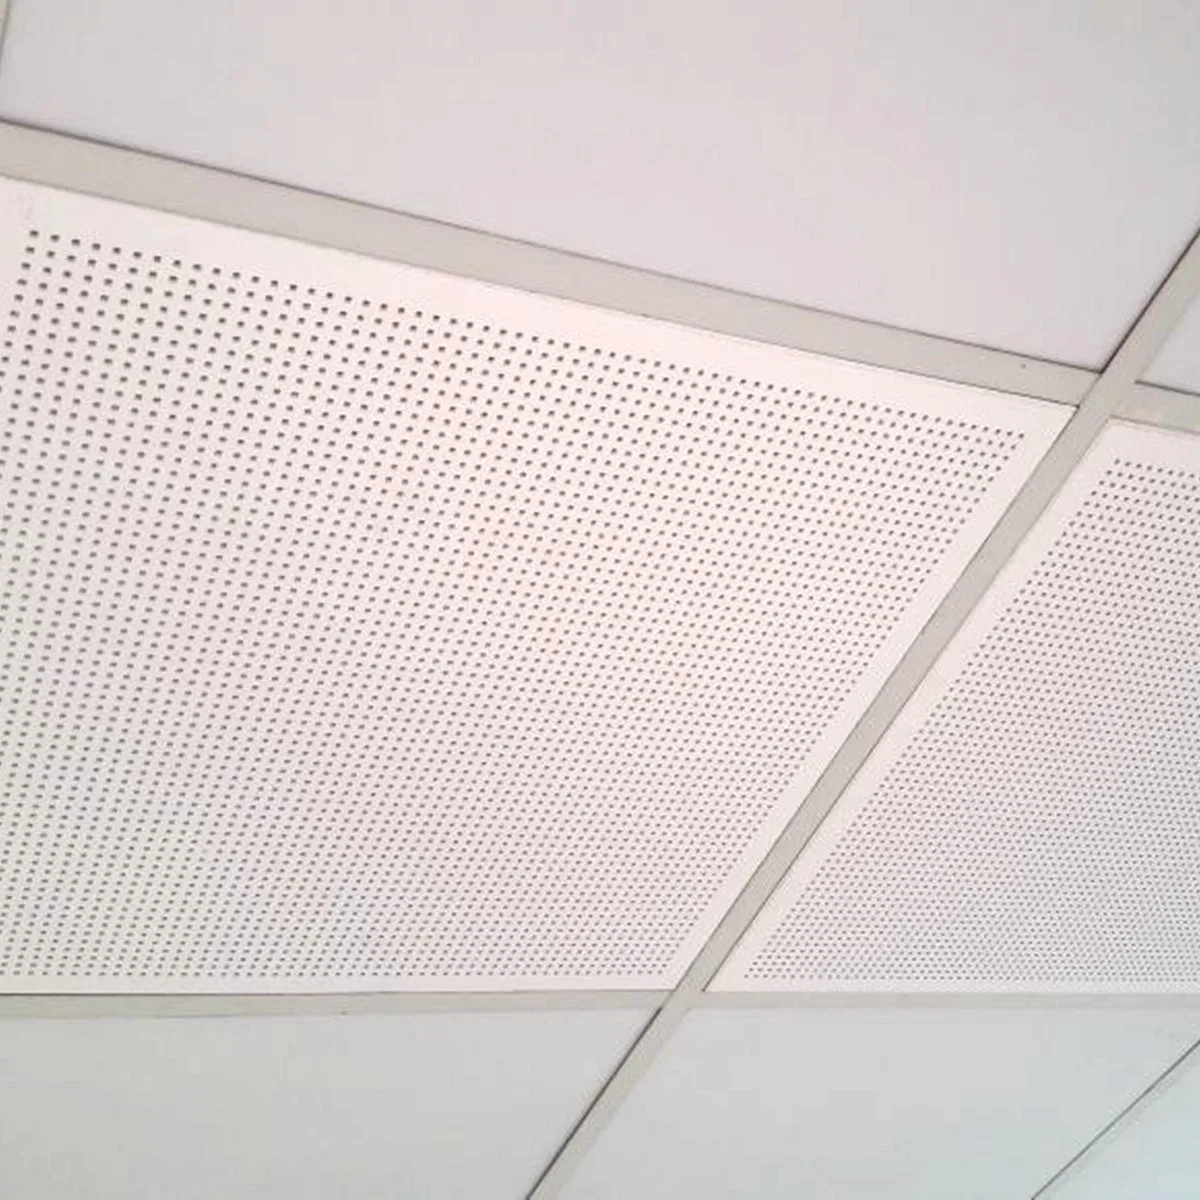 Sound Absorbing Perforated Plasterboard Acoustic Ceiling Panels